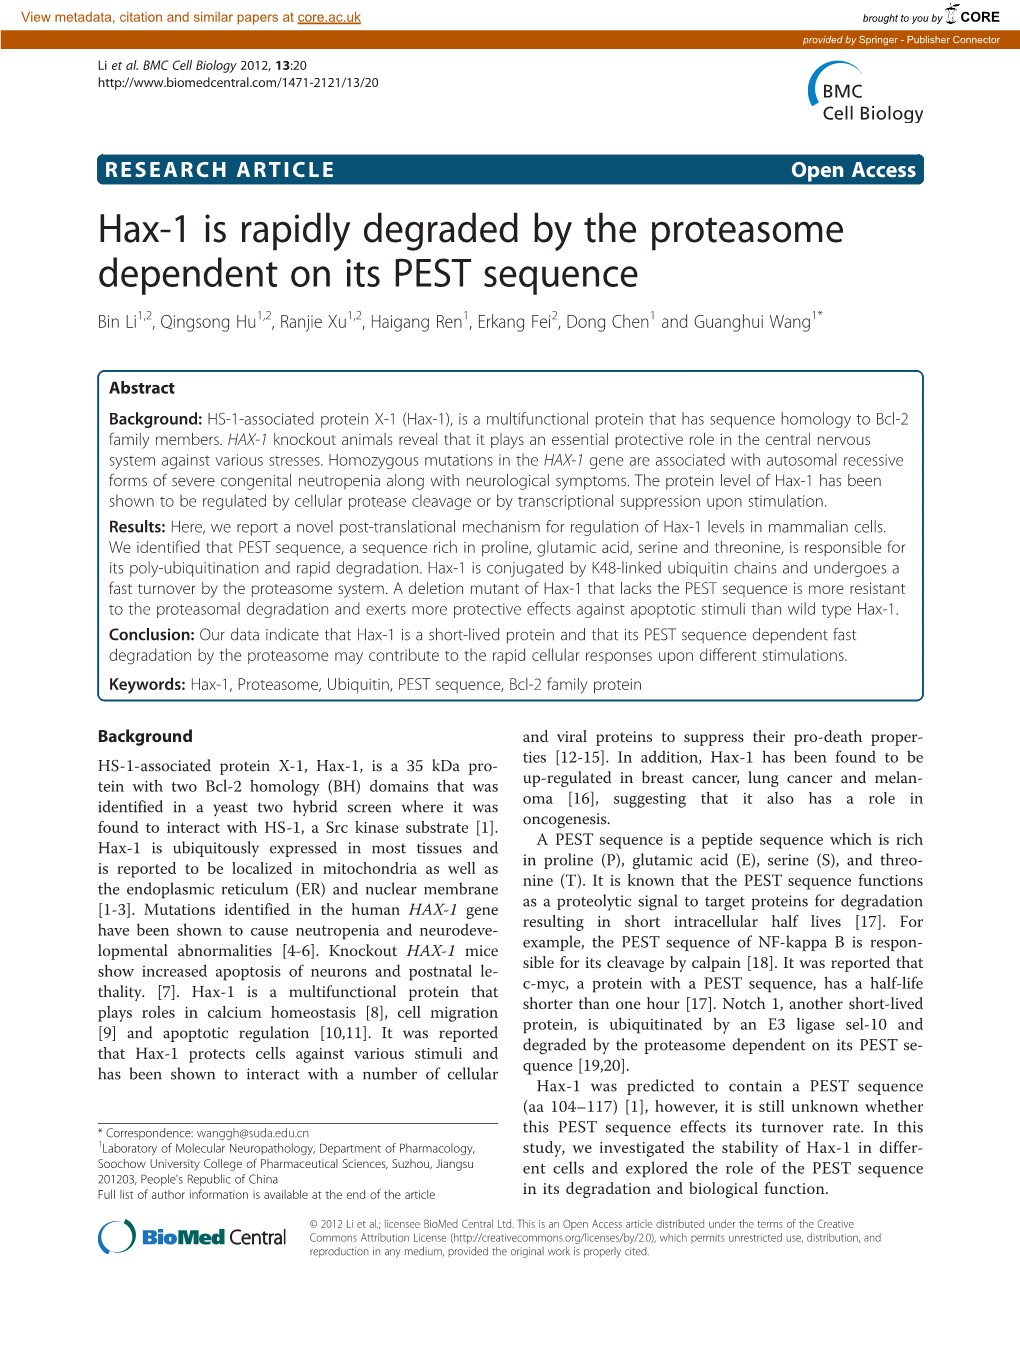 Hax-1 Is Rapidly Degraded by the Proteasome Dependent on Its PEST